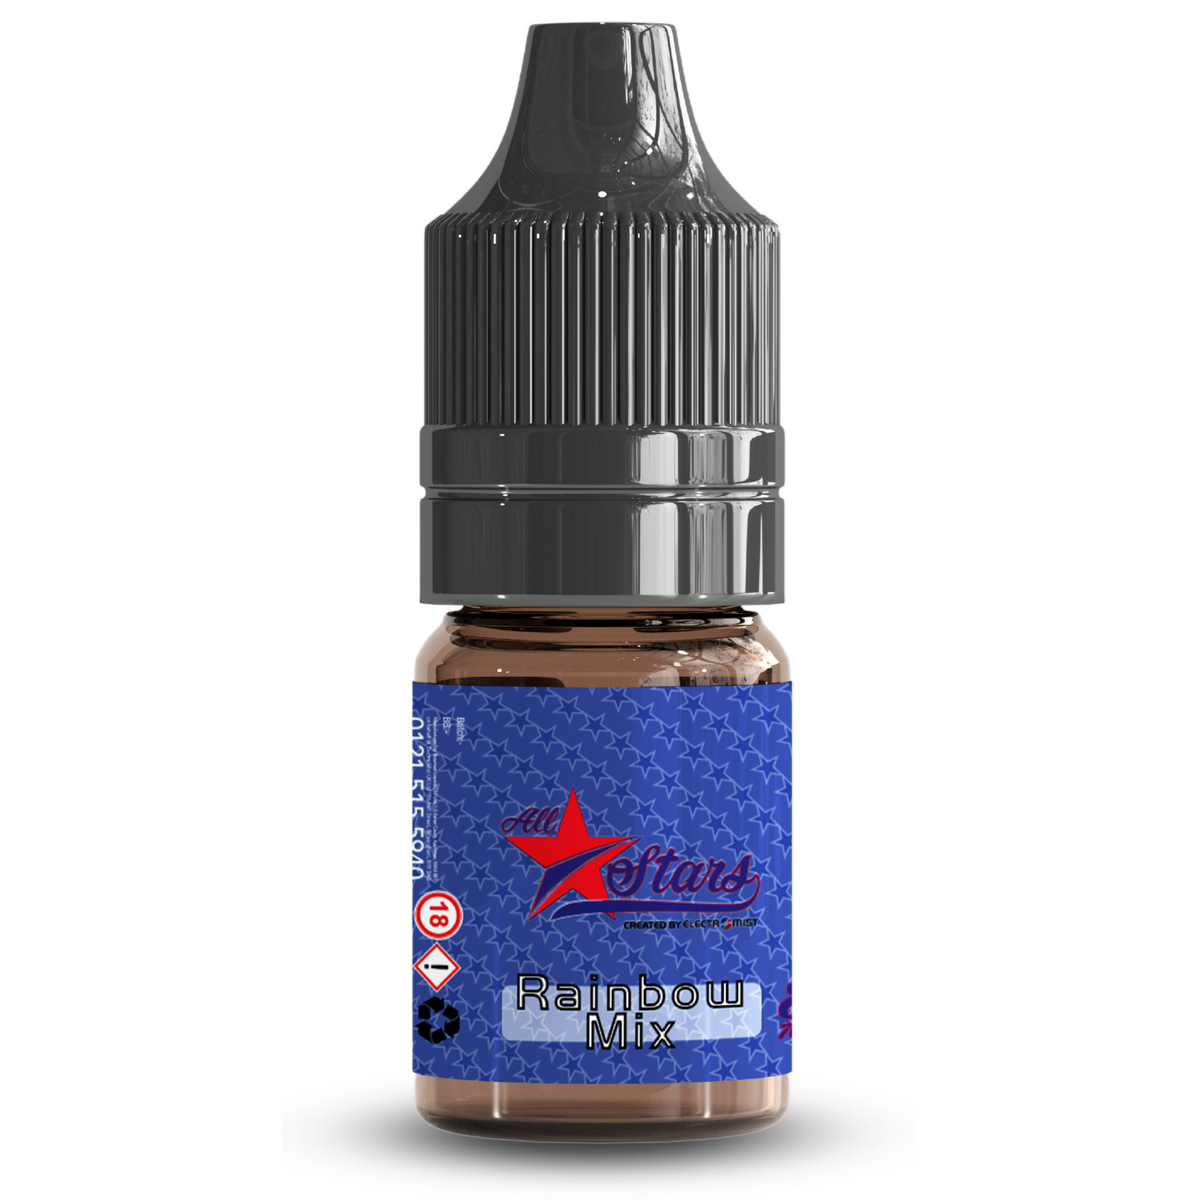 All Stars E-Liquid from the vape brand you can trust, Electromist, . Get your taste buds ready for a flavour sensation, Rainbow Mix. Nicotine Content: 6mg/12mg/18mg Products may contain nicotine. For over 18s Only ejuice, vape pen, eliquid, e cigarette, 10ml, vaping, cloud, PG, VG, 60/40, vape liquid, Flavour, TPD